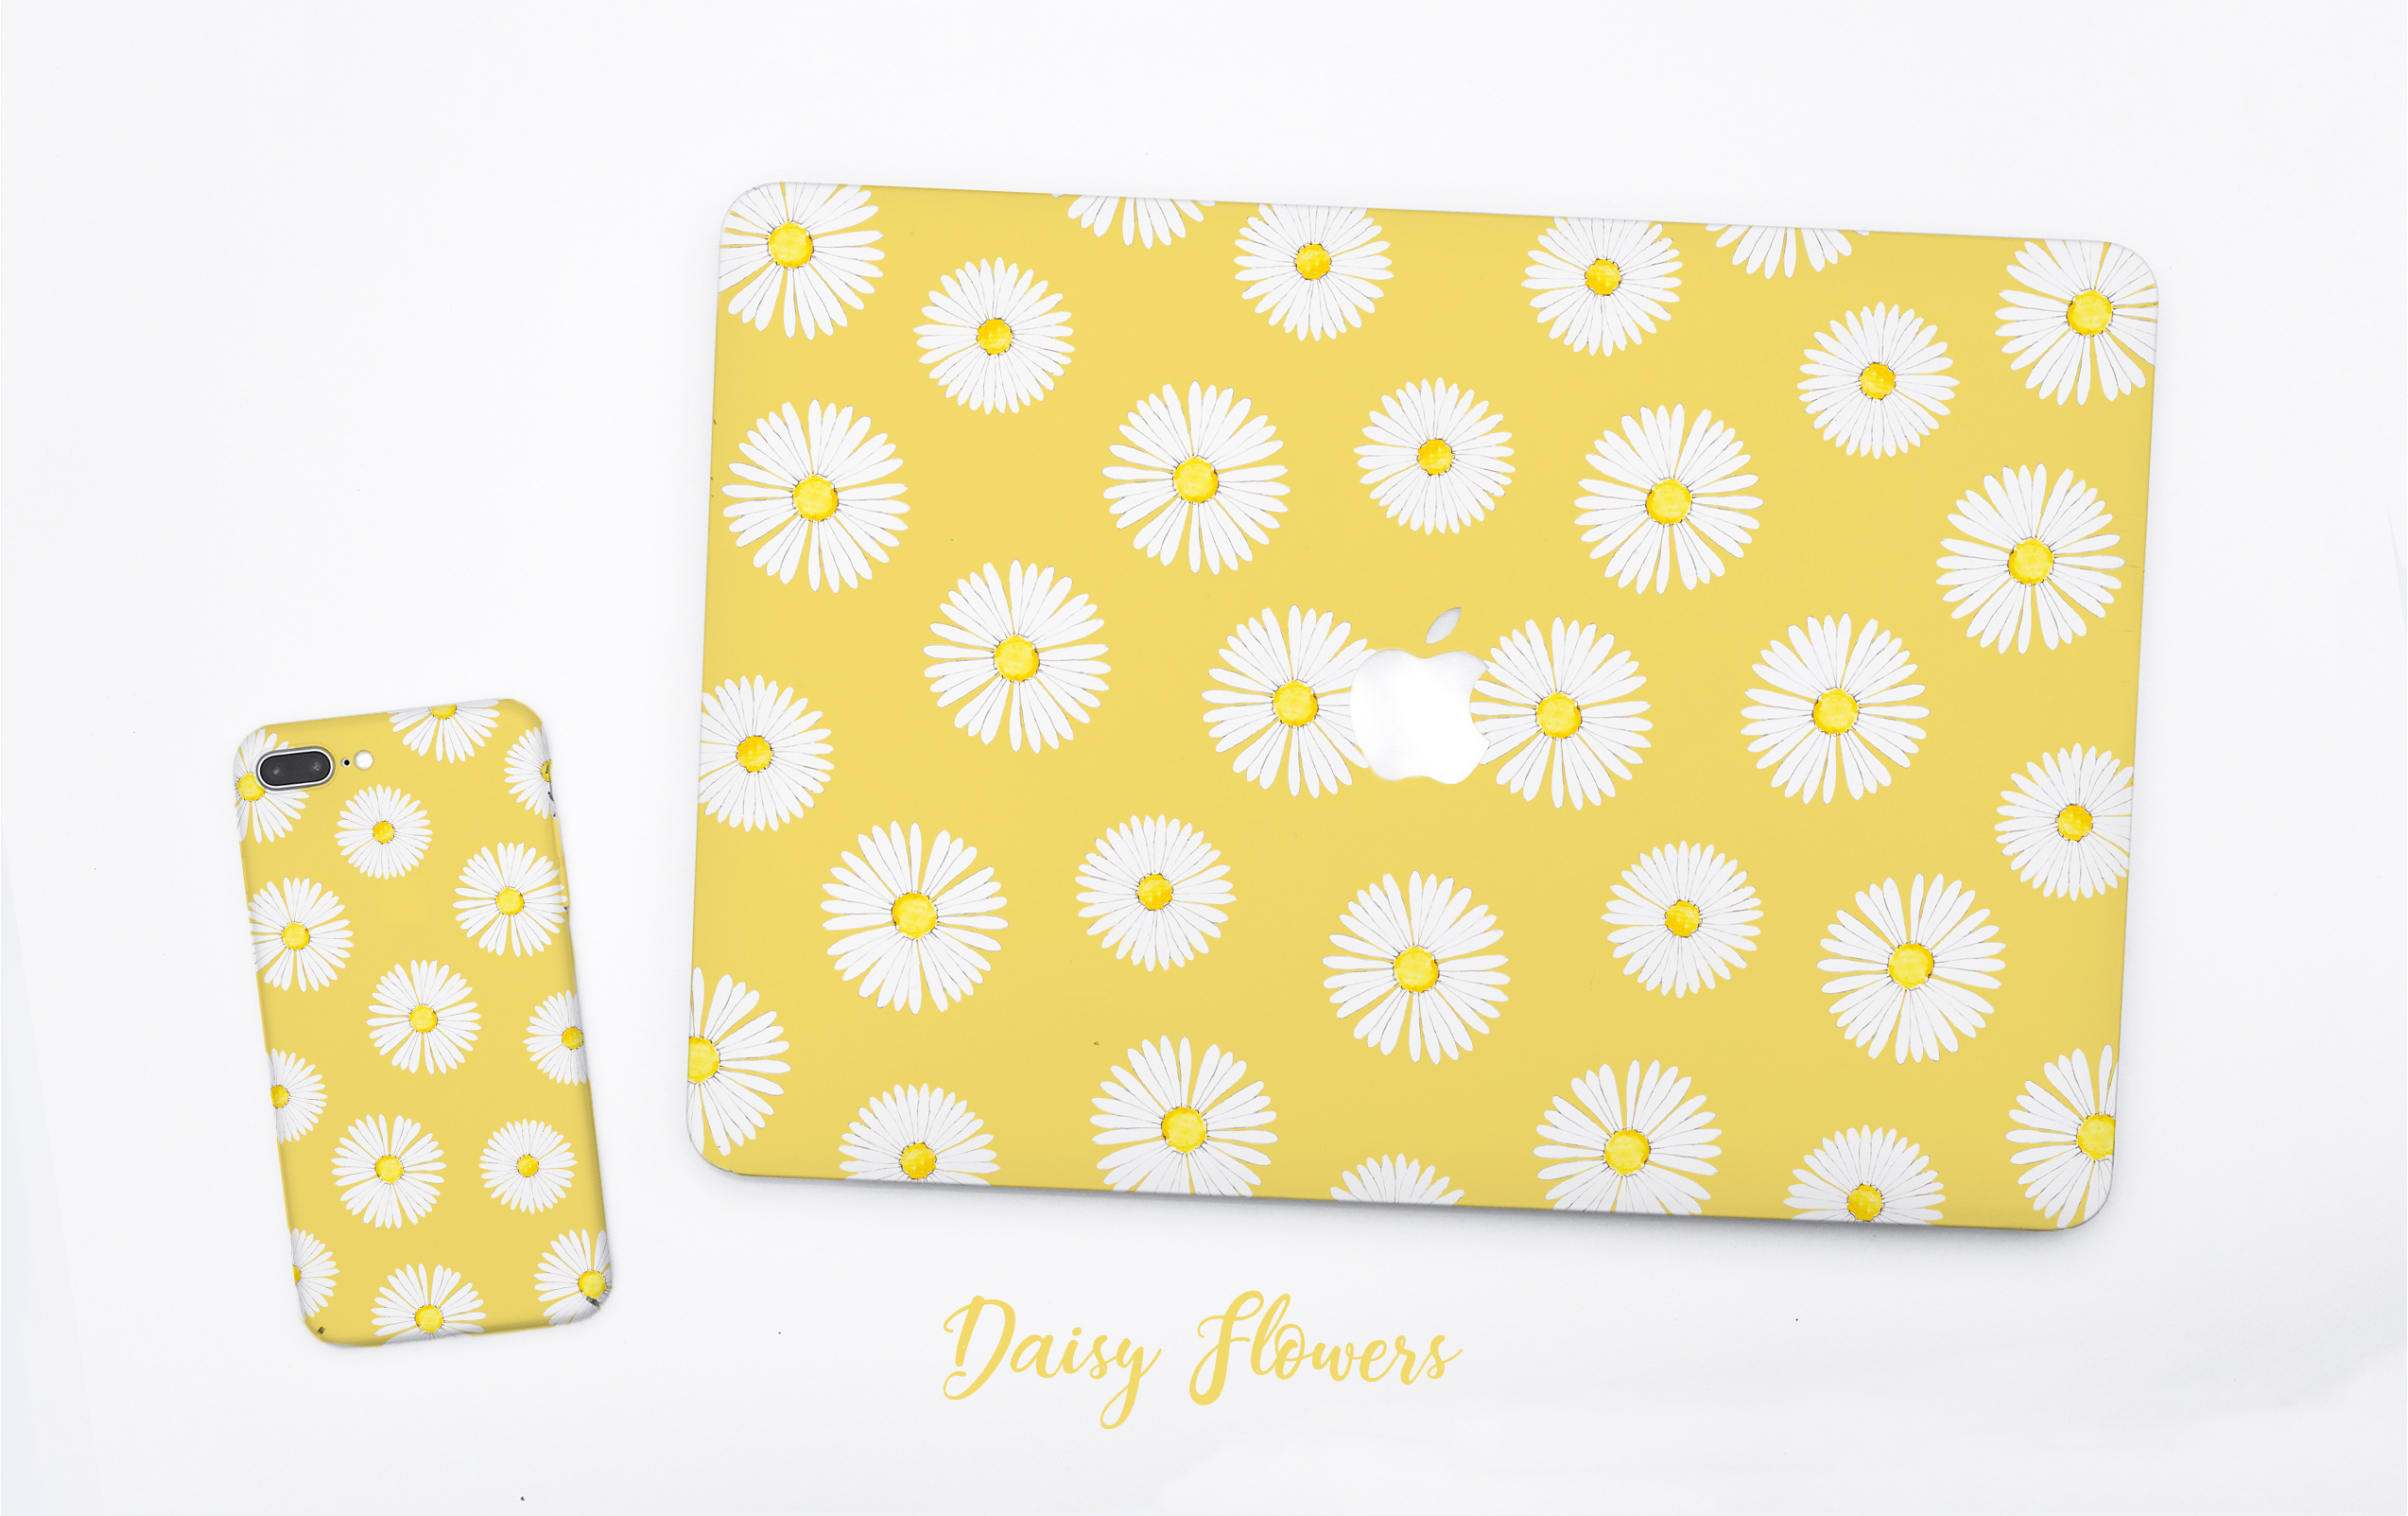 Daisy flowers MacBook  and phone case